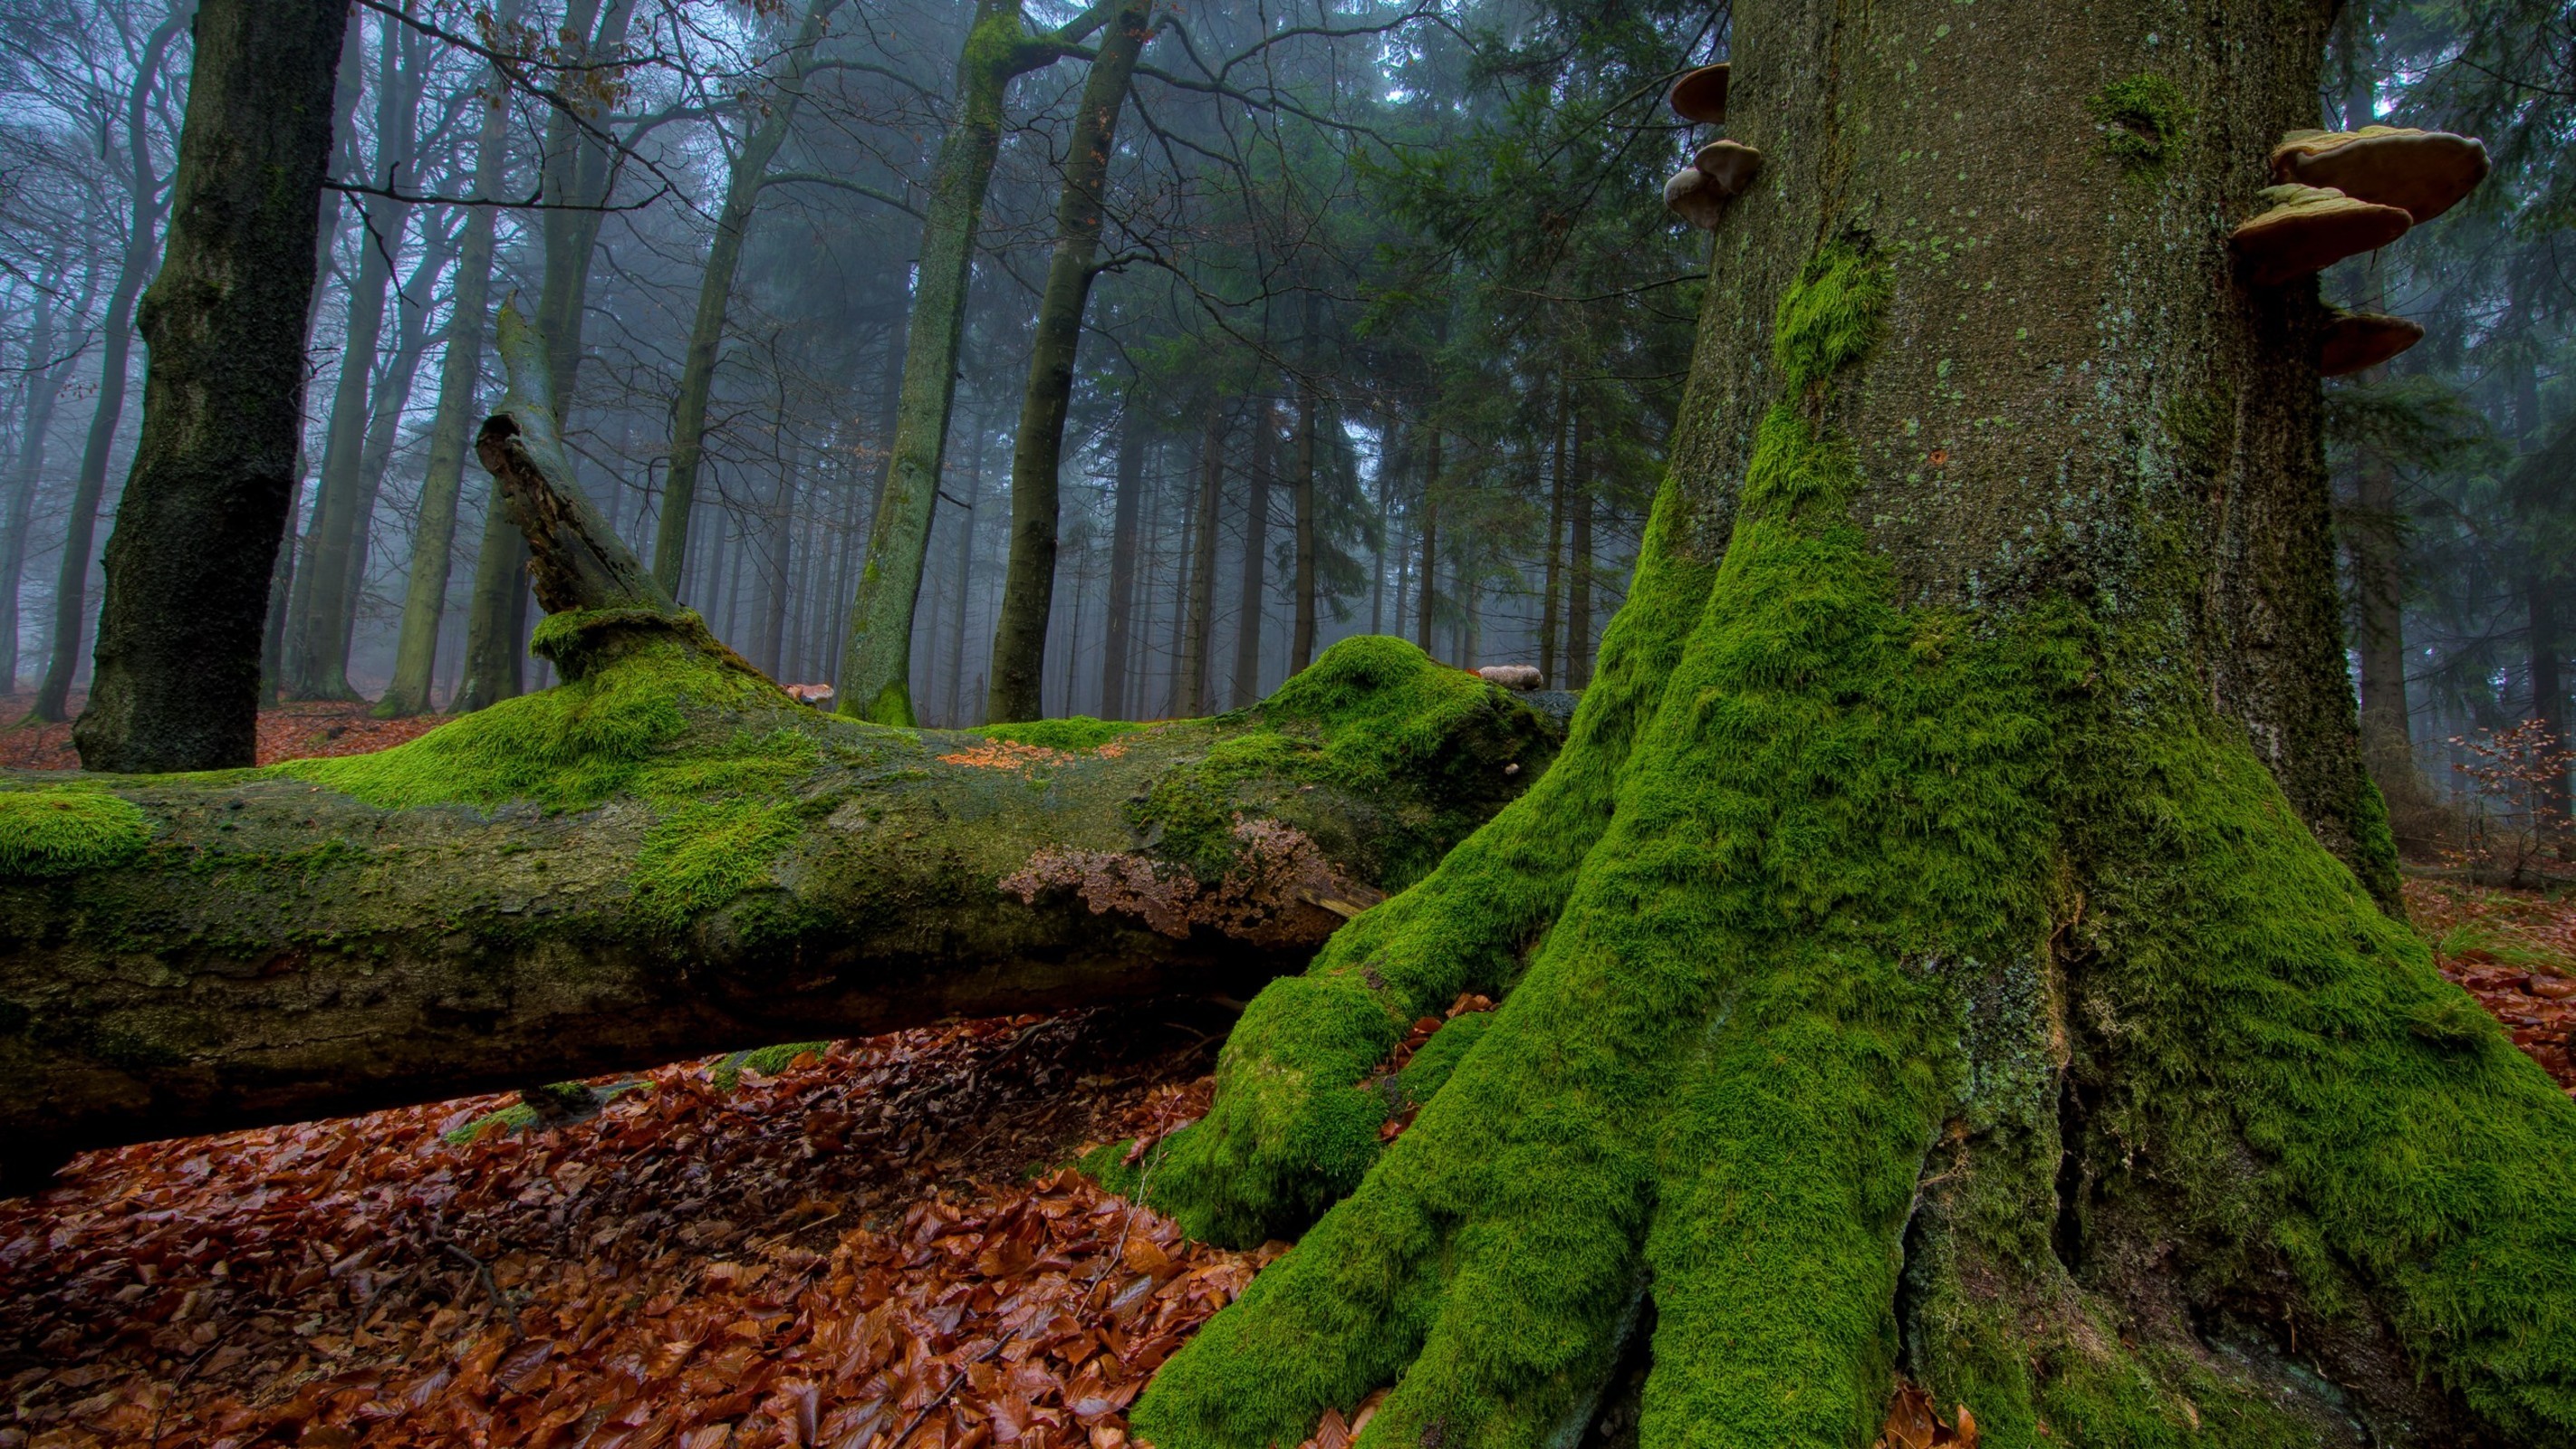 General 2844x1600 nature moss leaves mist fall outdoors forest wood plants fallen leaves